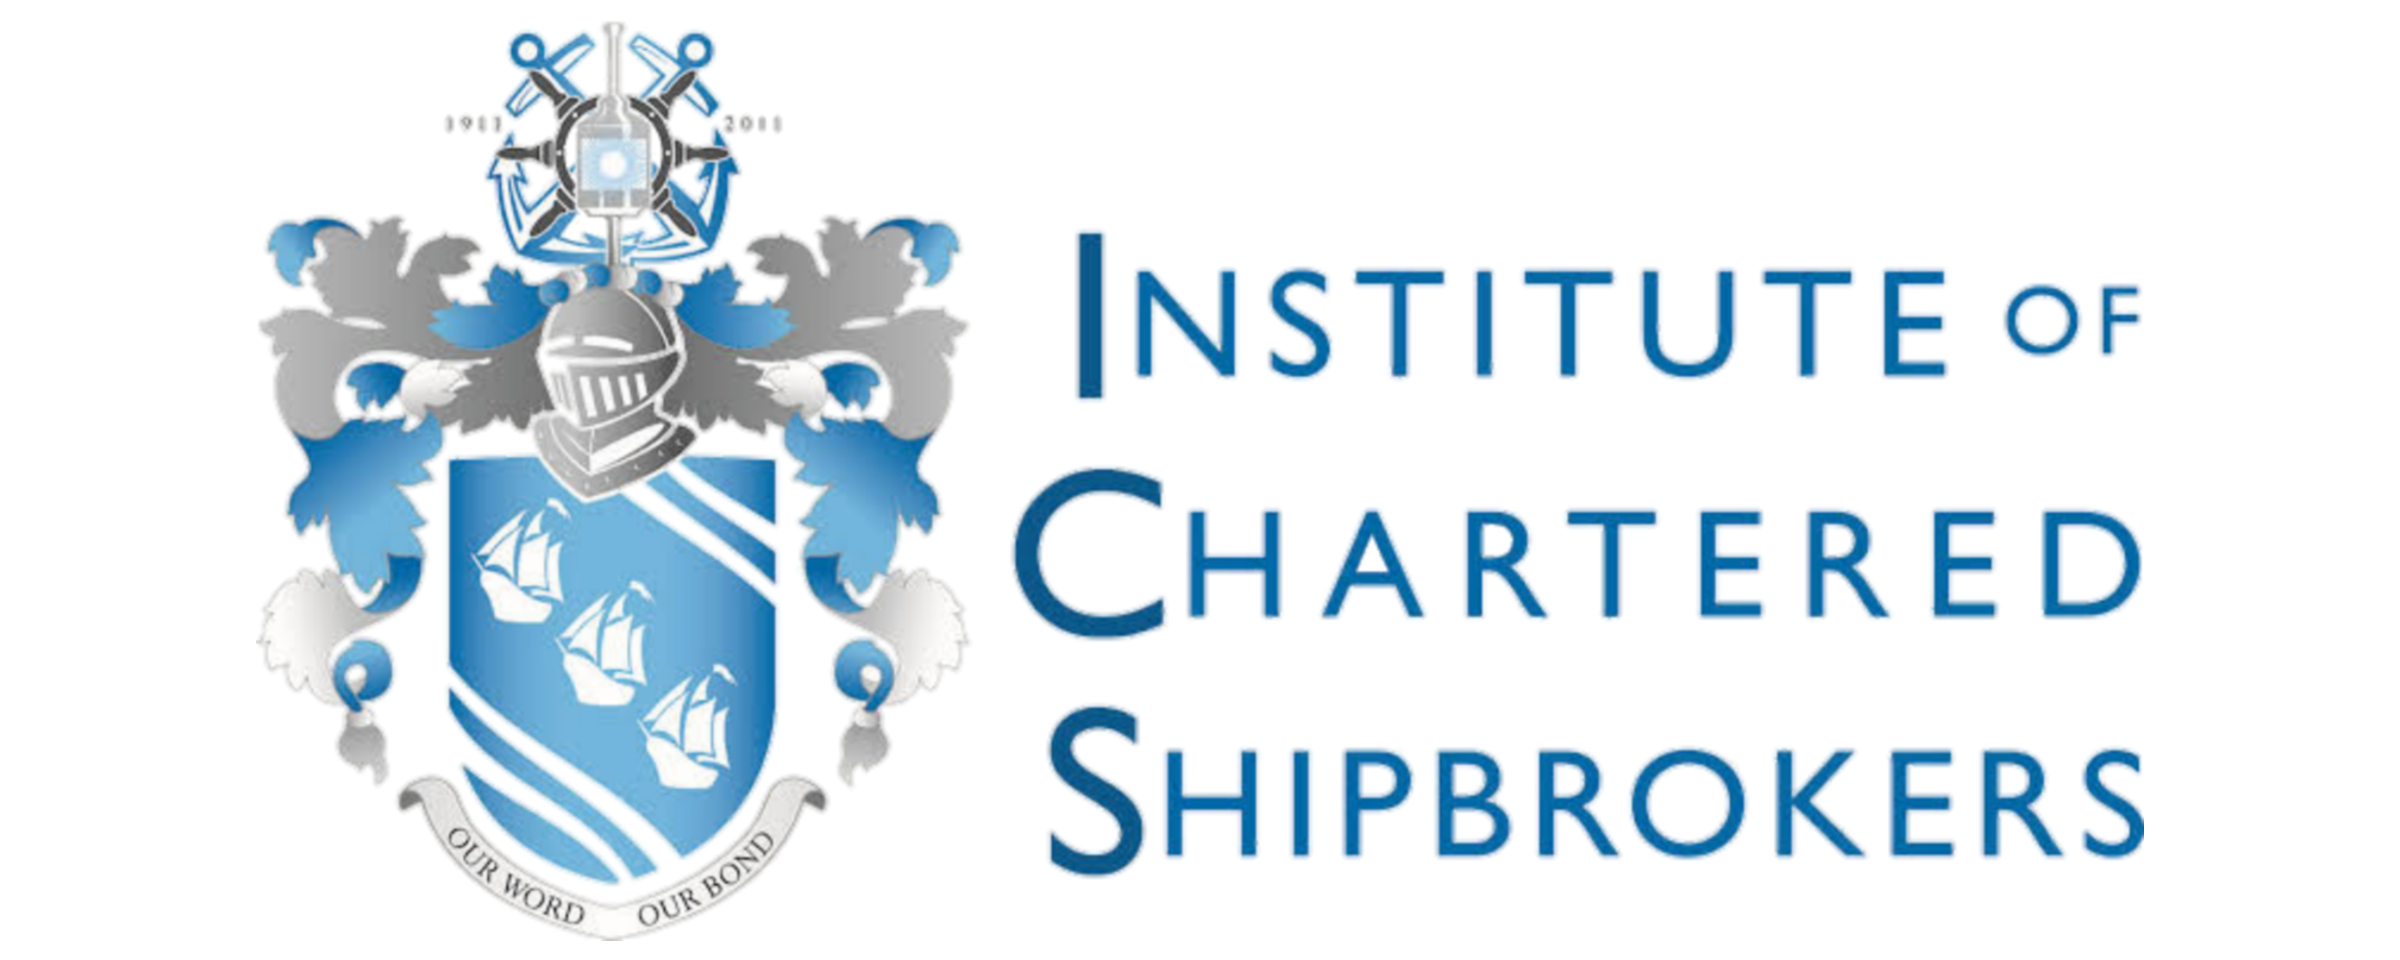 the institute if chartered shipbrokers pakistan branch MTI Maritime Training Institute affiliation logo karachi pakistan merchant navy courses how to join